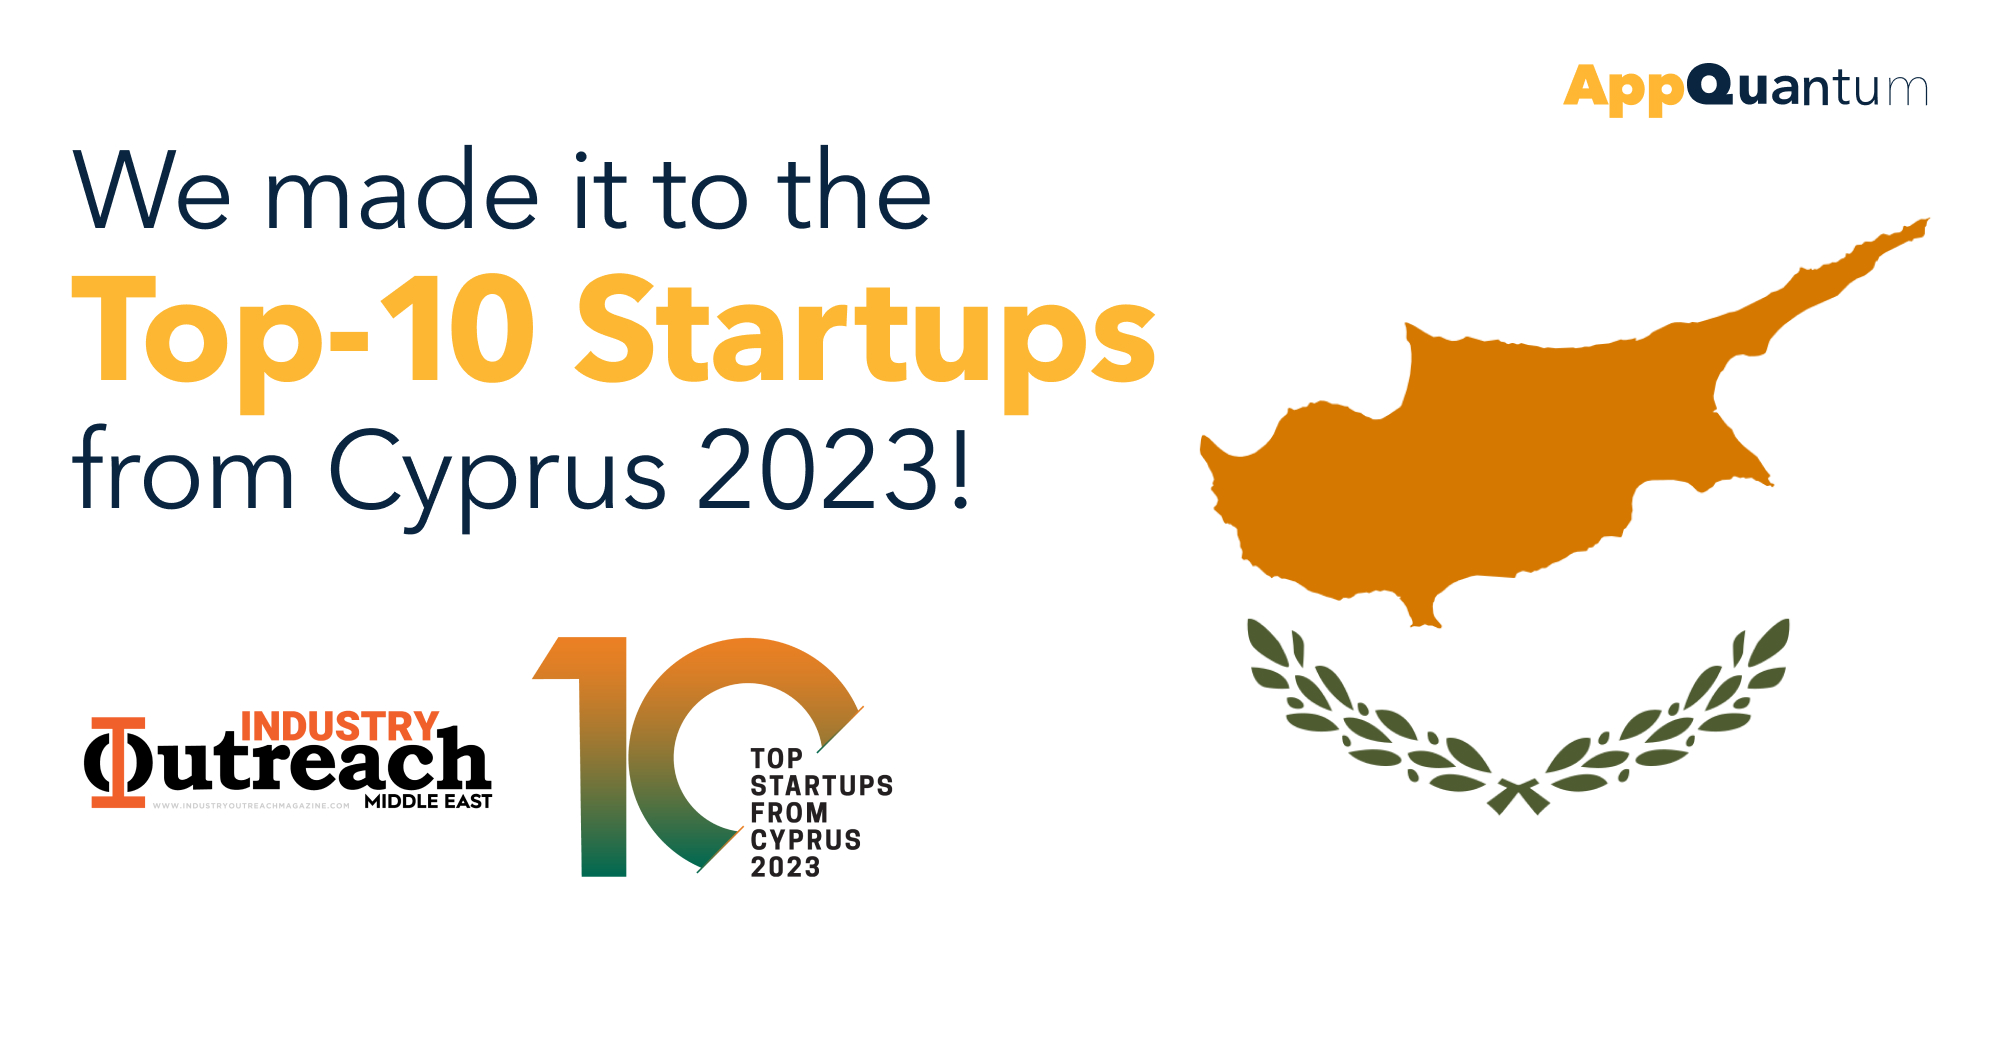 AppQuantum Made It to the Top-10 Startups from Cyprus 2023!